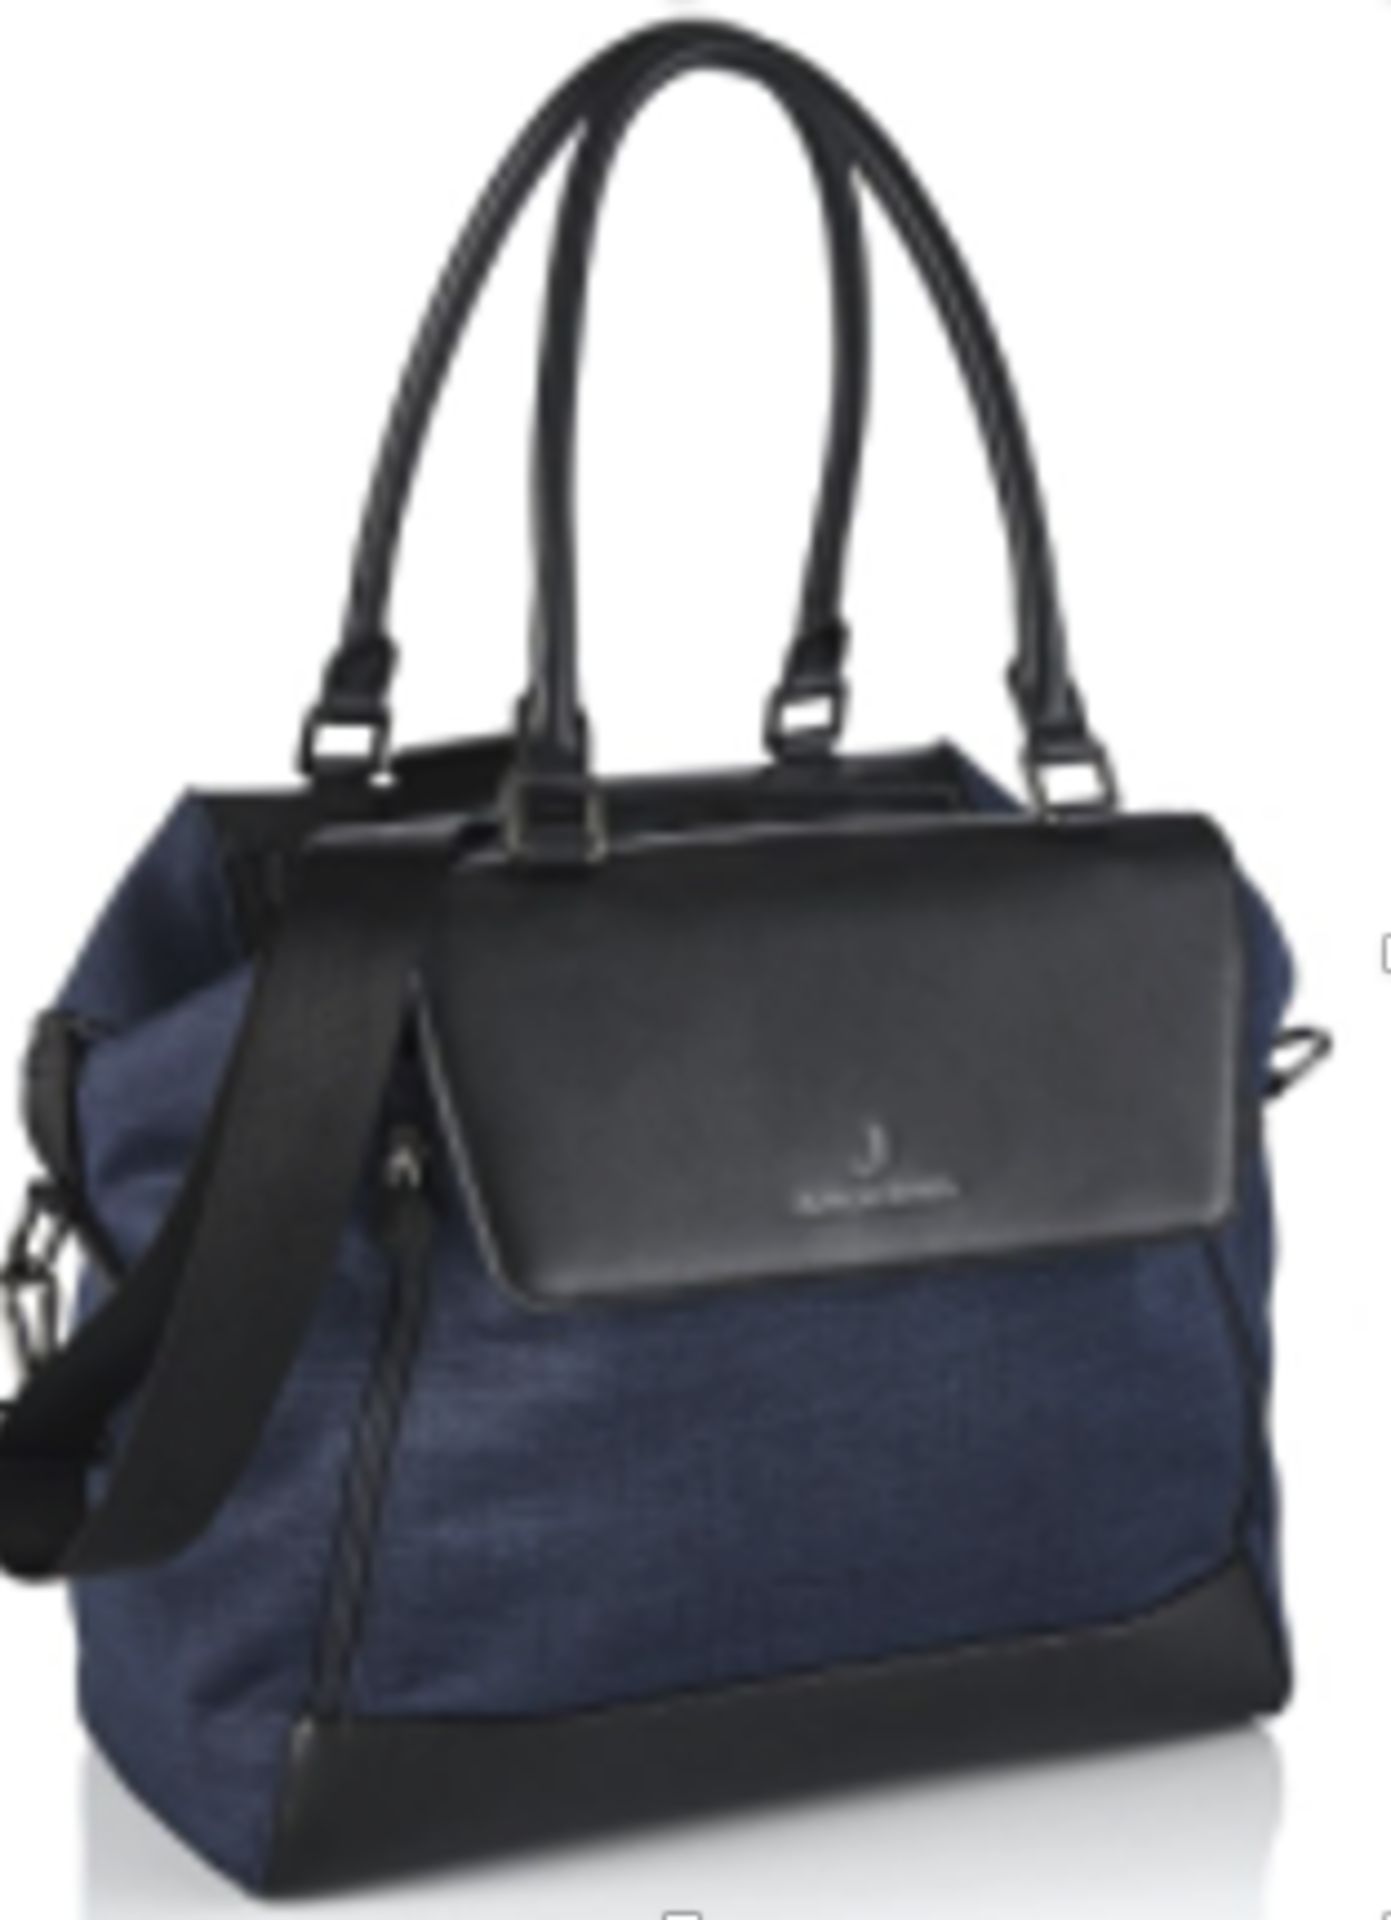 Title: JESSIE CHANGING BAG - INSIGNIA NAVY - £140Description: JESSIE CHANGING BAG - INSIGNIA